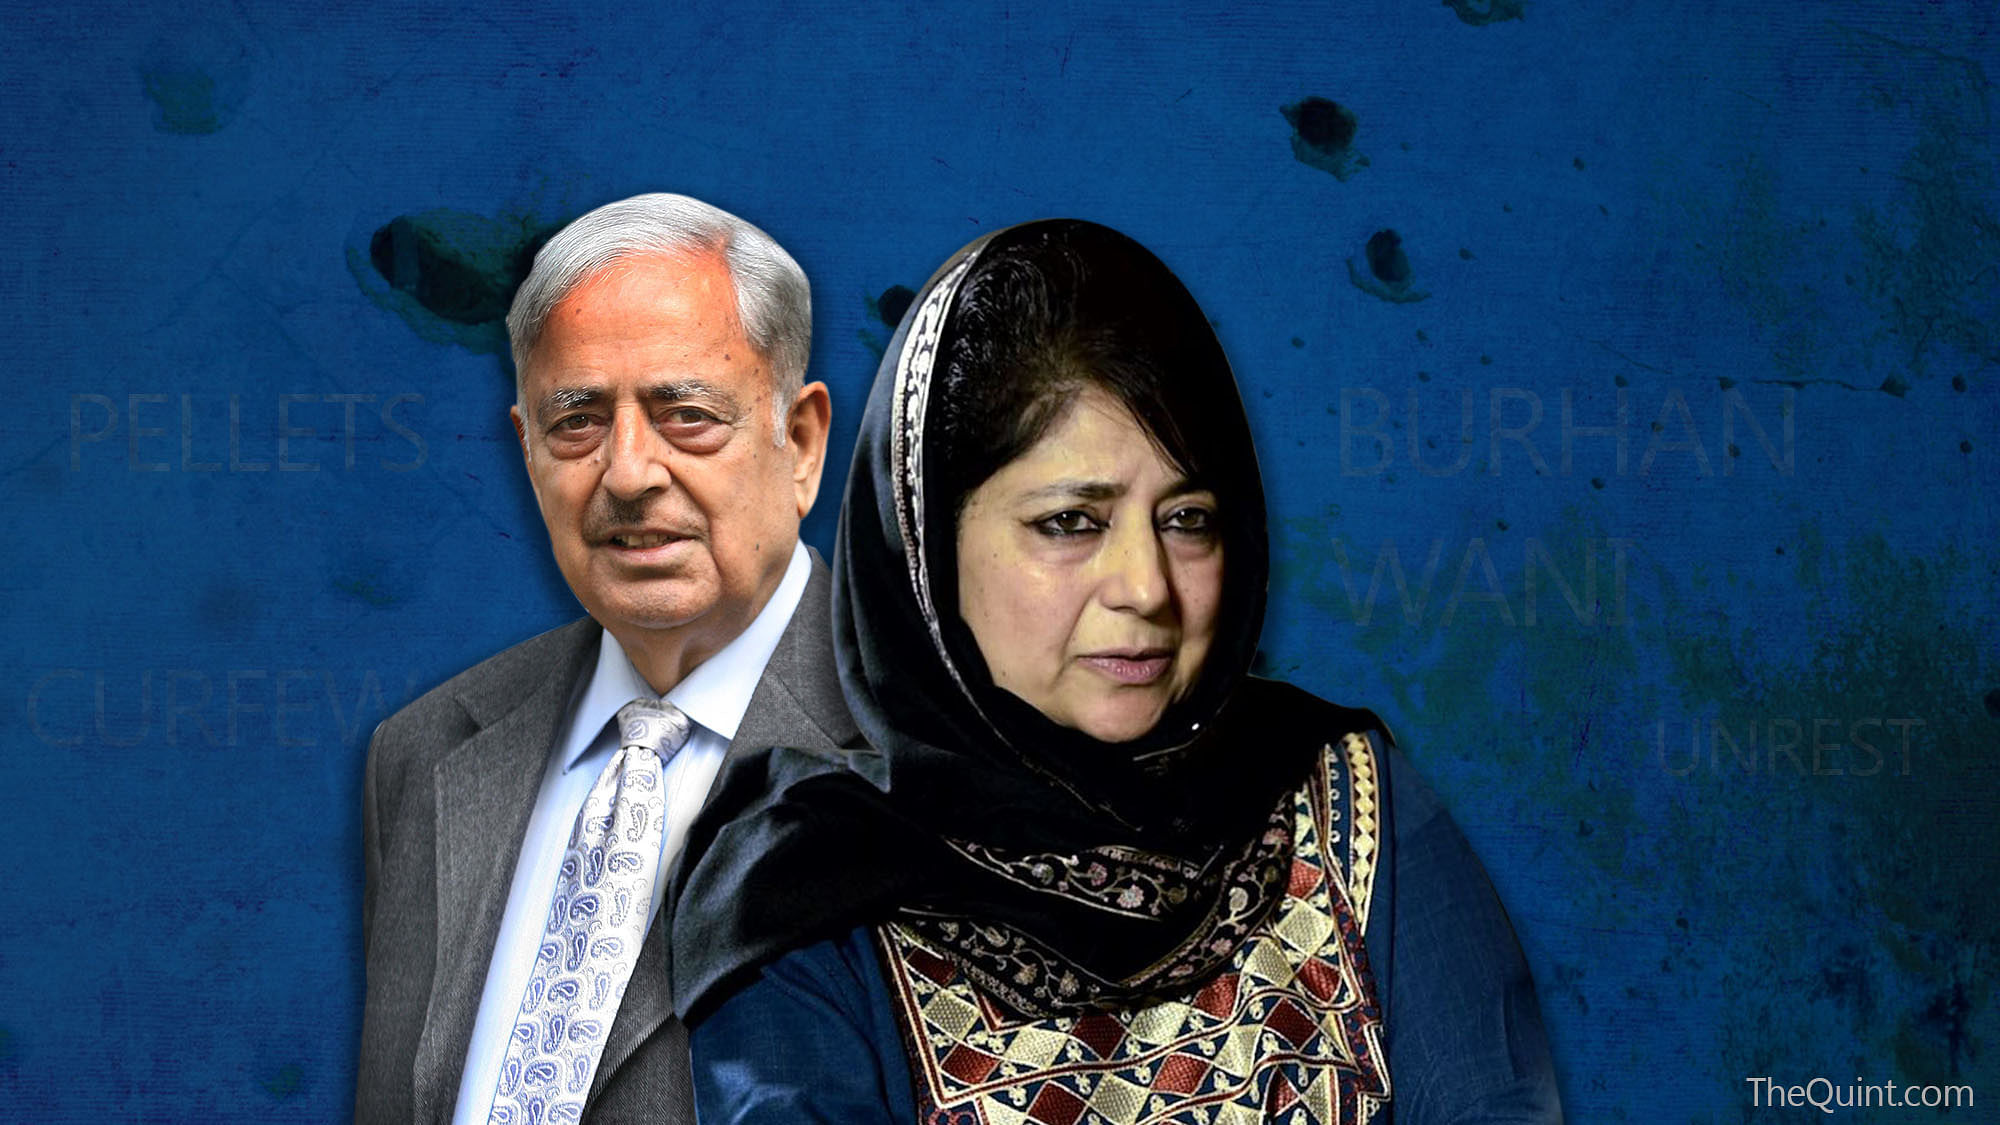 A year after Mufti senior’s demise, Mehbooba has managed to consolidate her position despite a rough rollercoaster ride. (Photo: Rhythum Seth/<b>The Quint</b>)